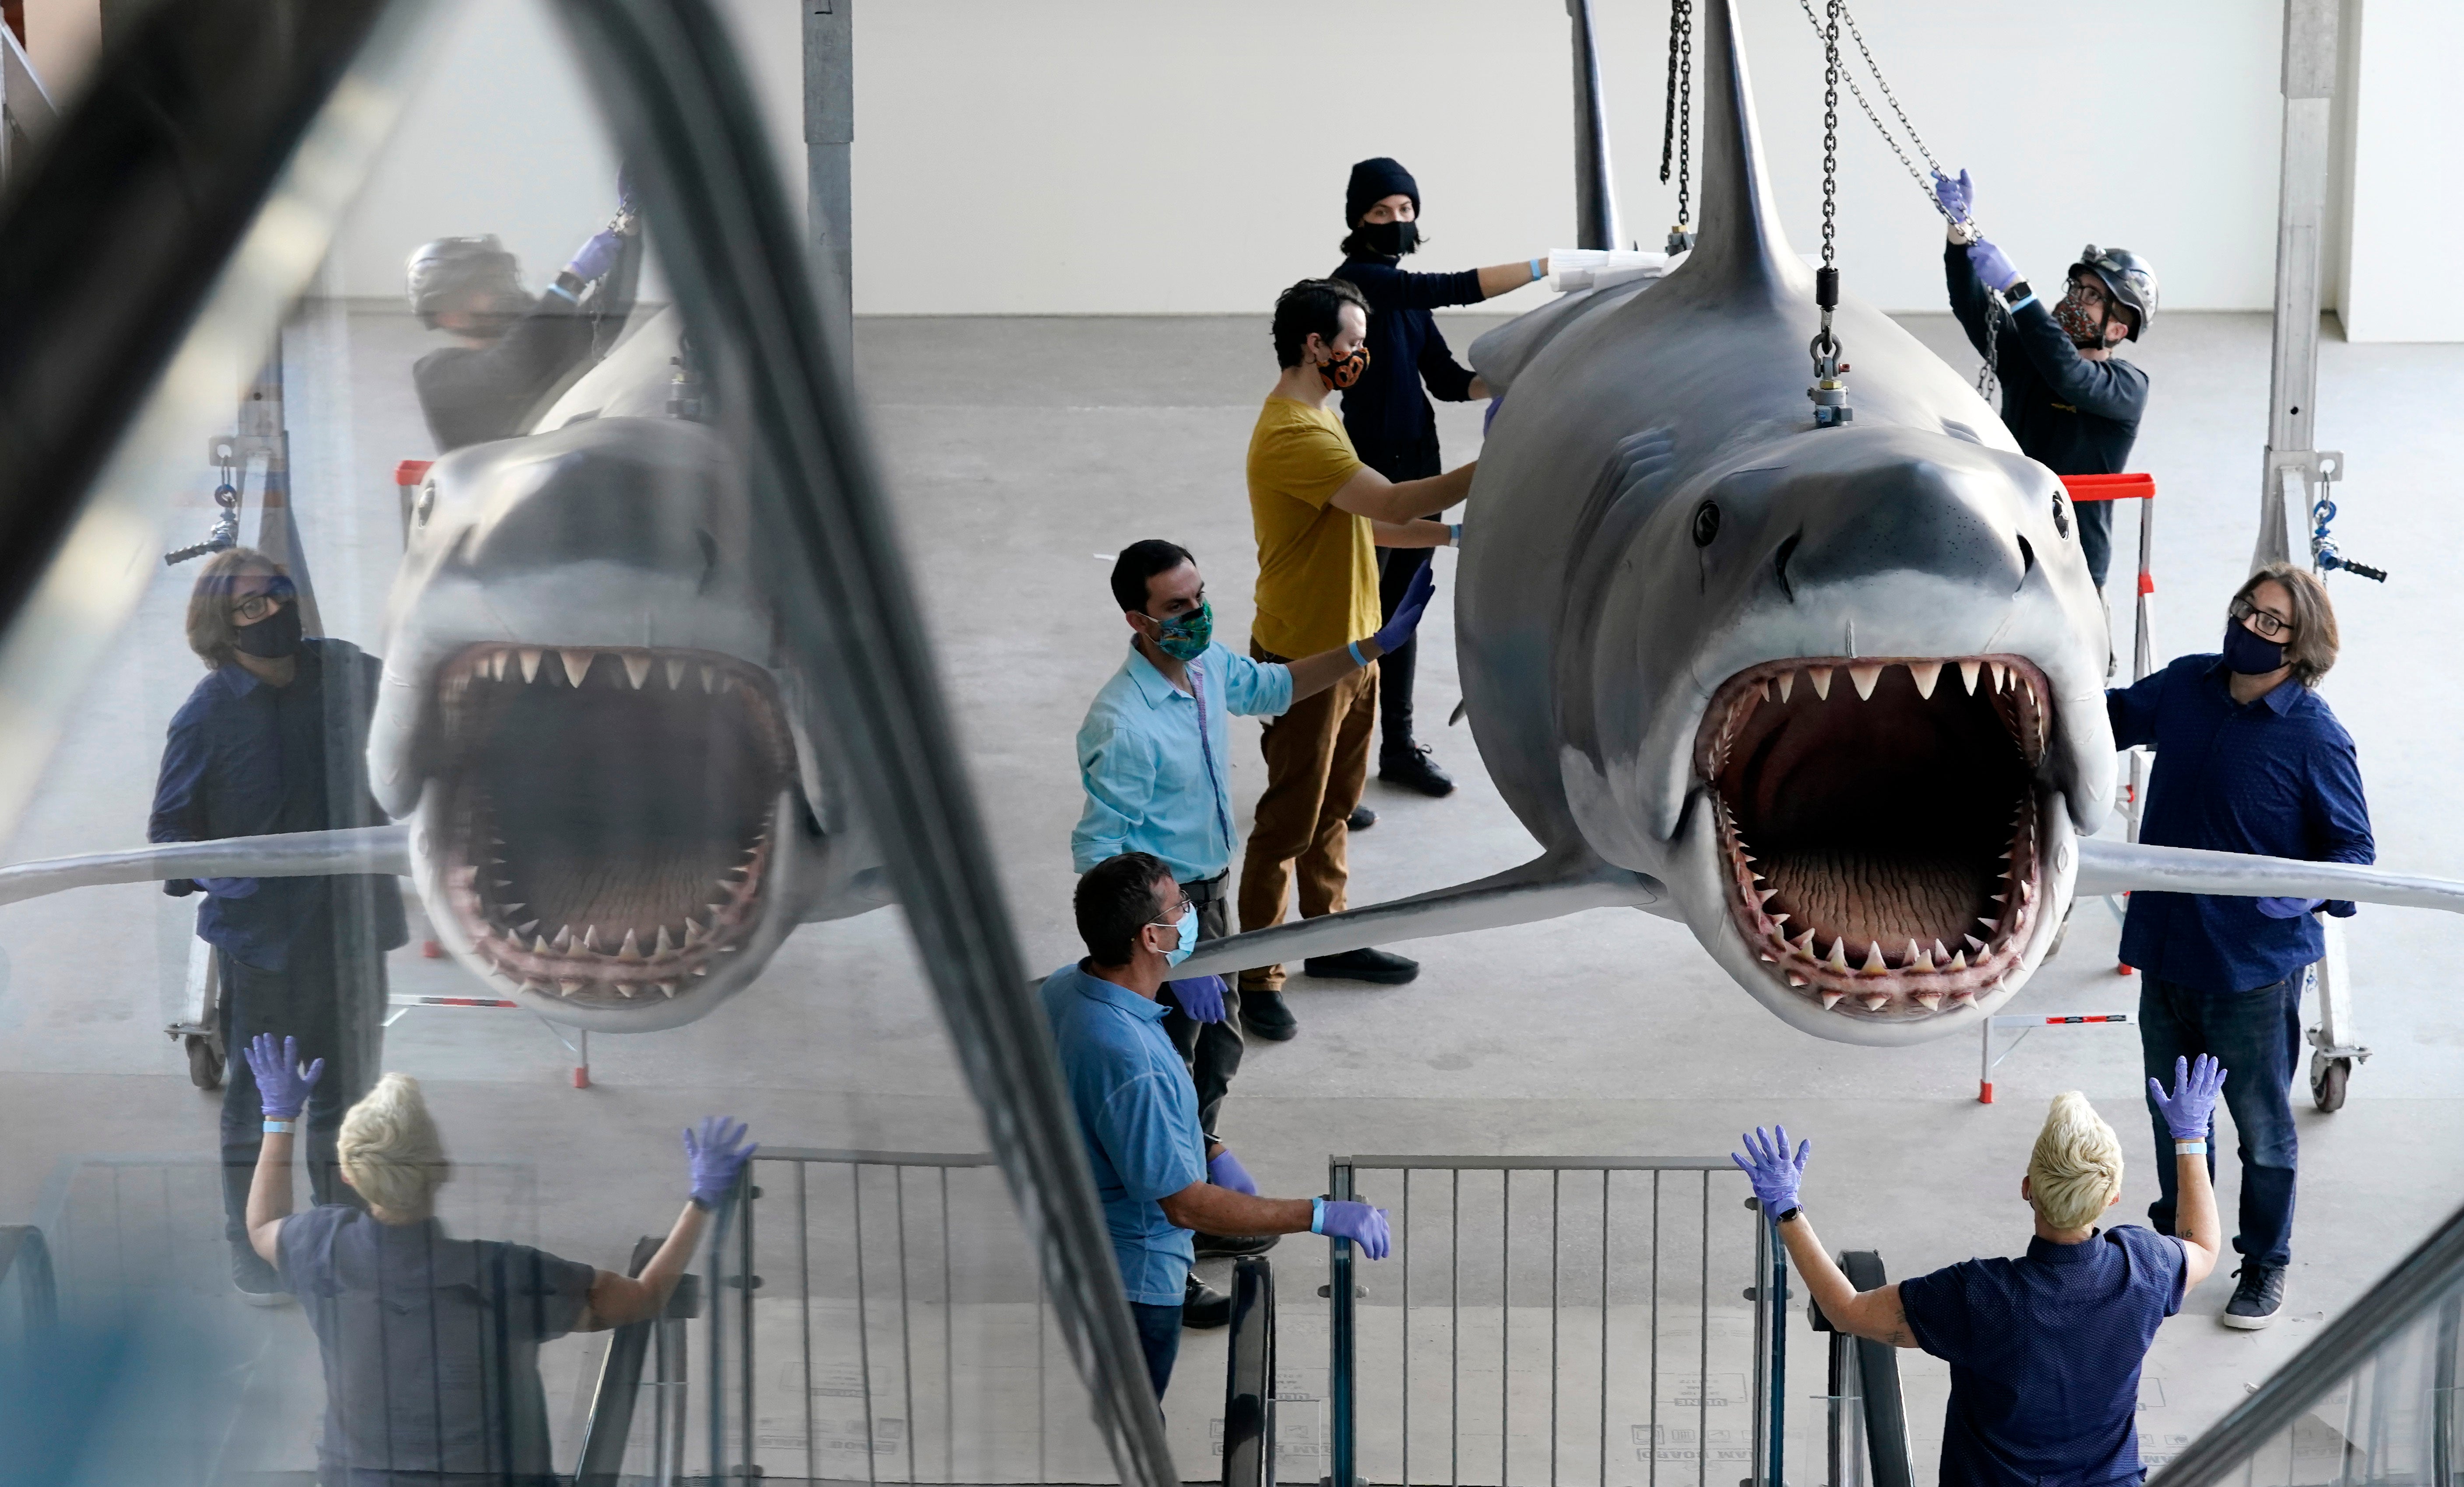 "Jaws" Installation at The Academy Museum of Motion Pictures